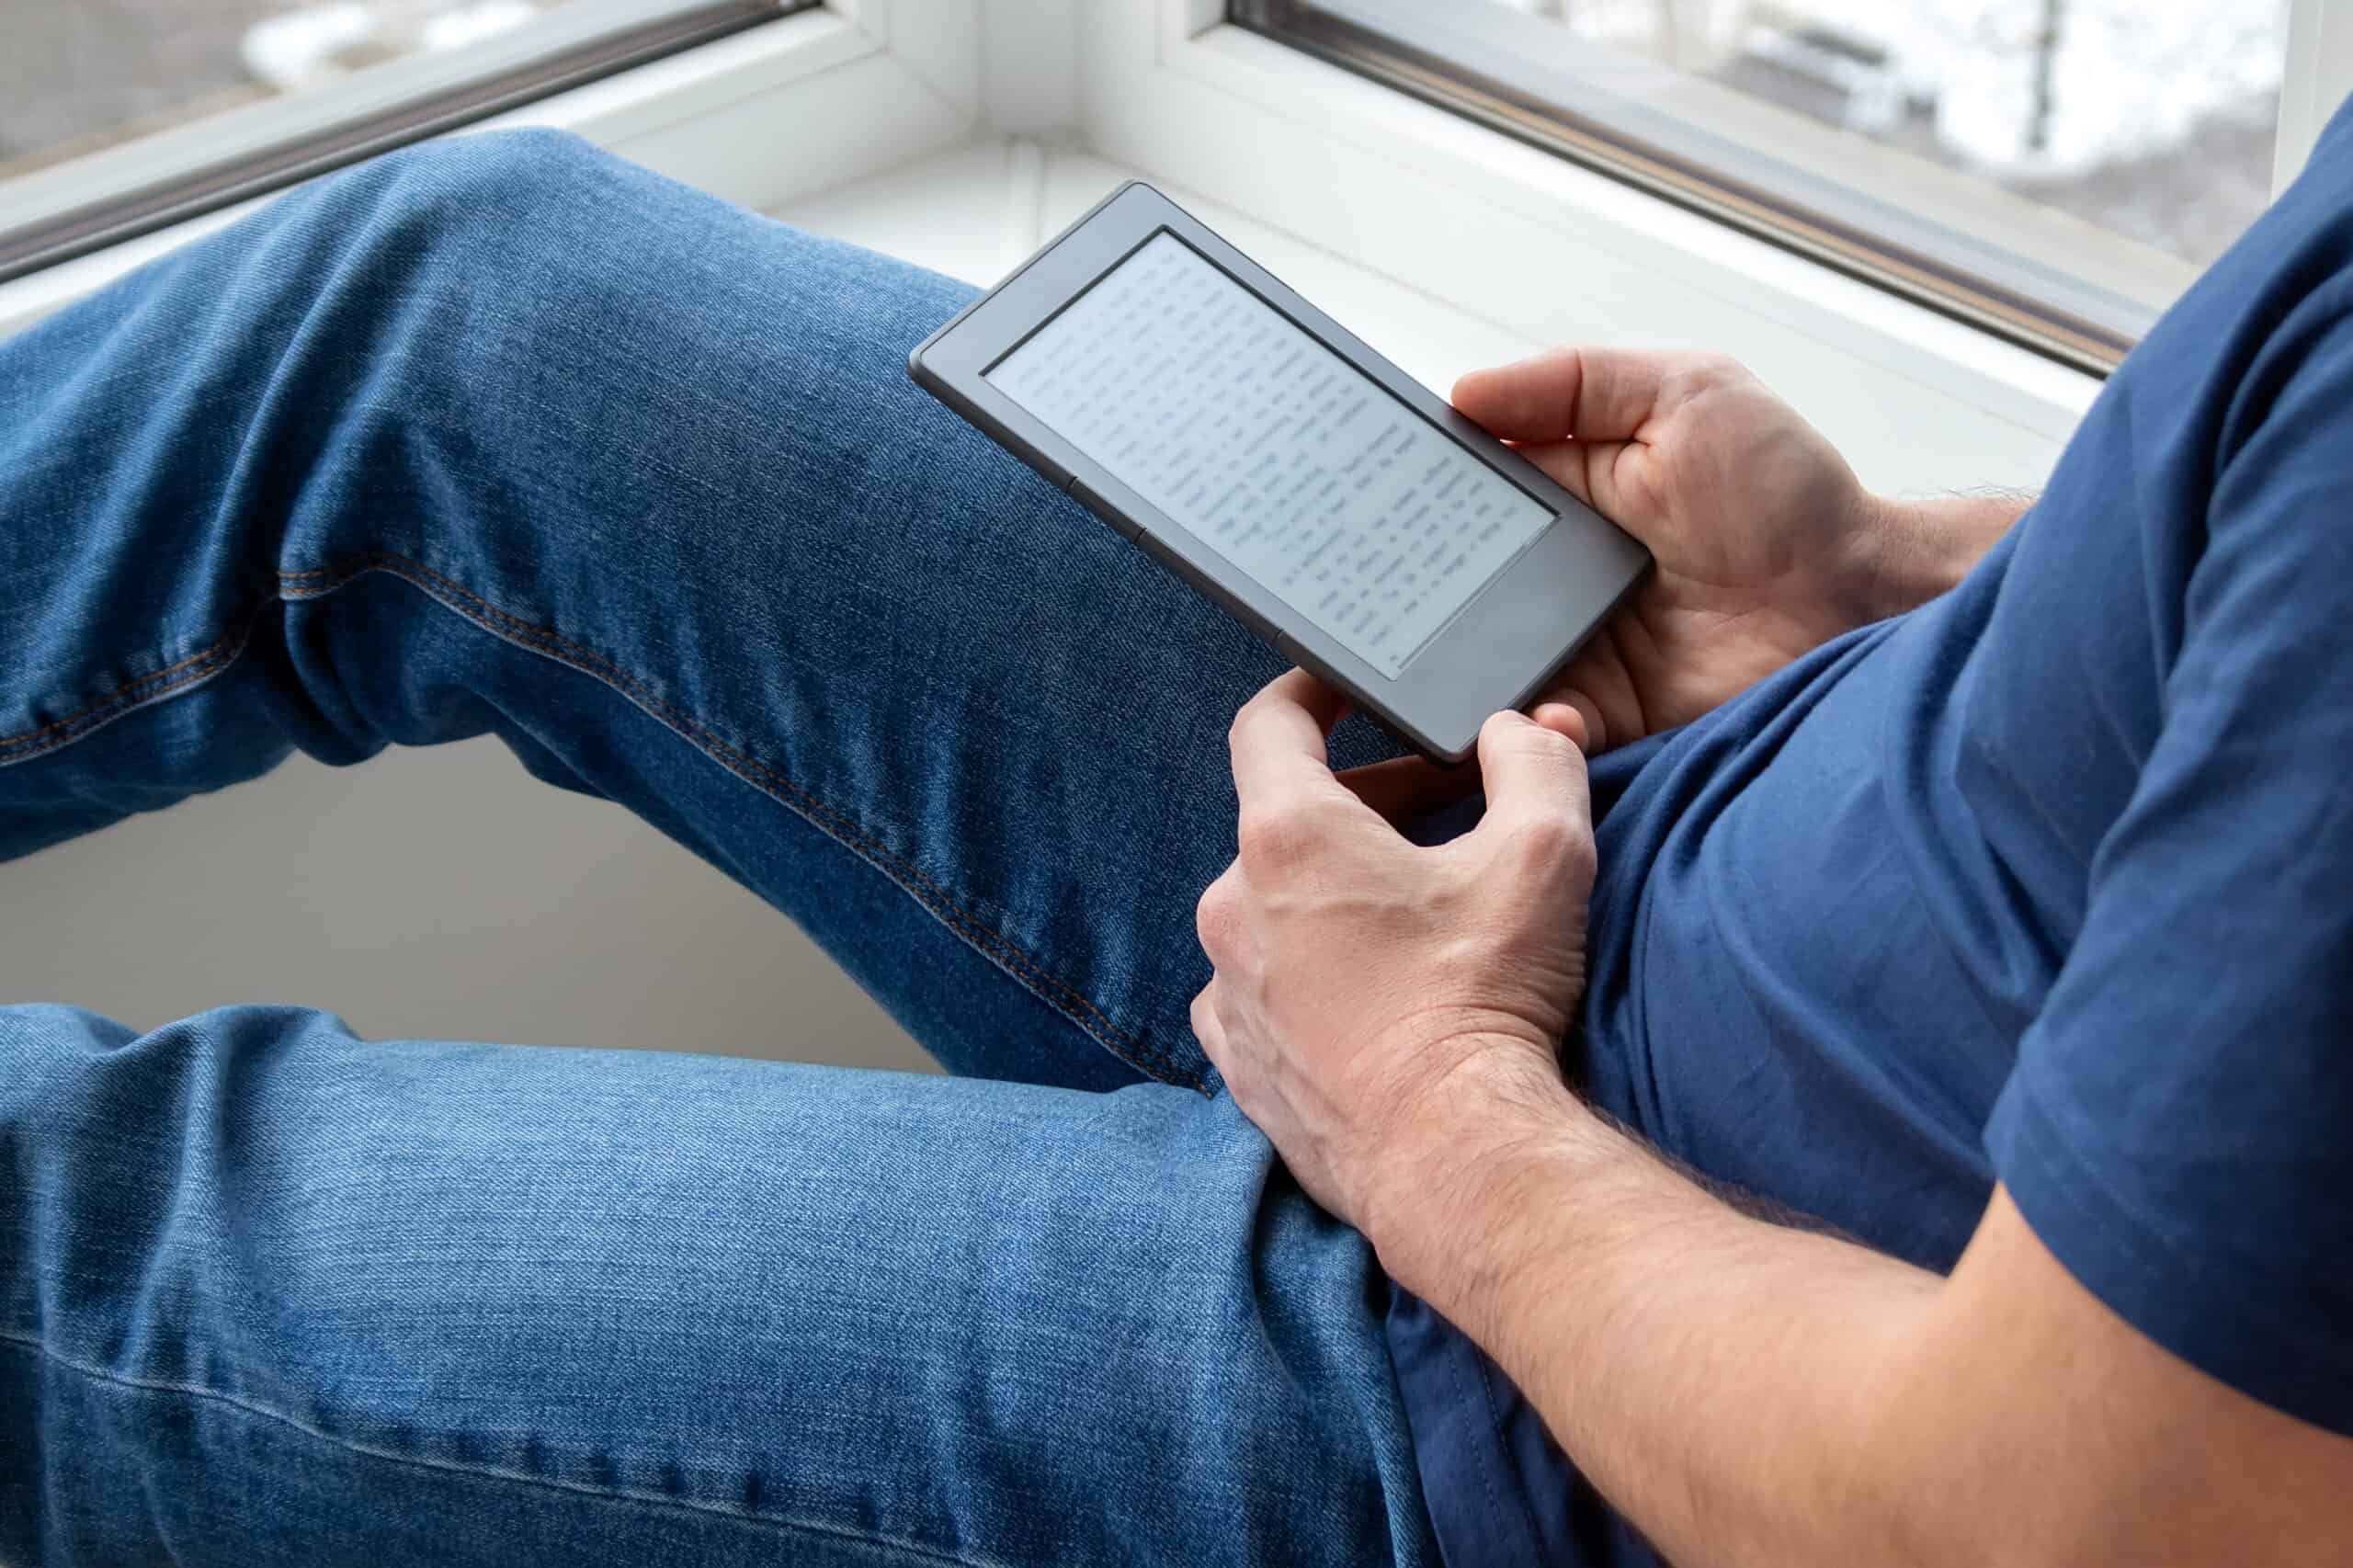 New  Kindle Scribe Updates Make It People's Favorite - Good e-Reader